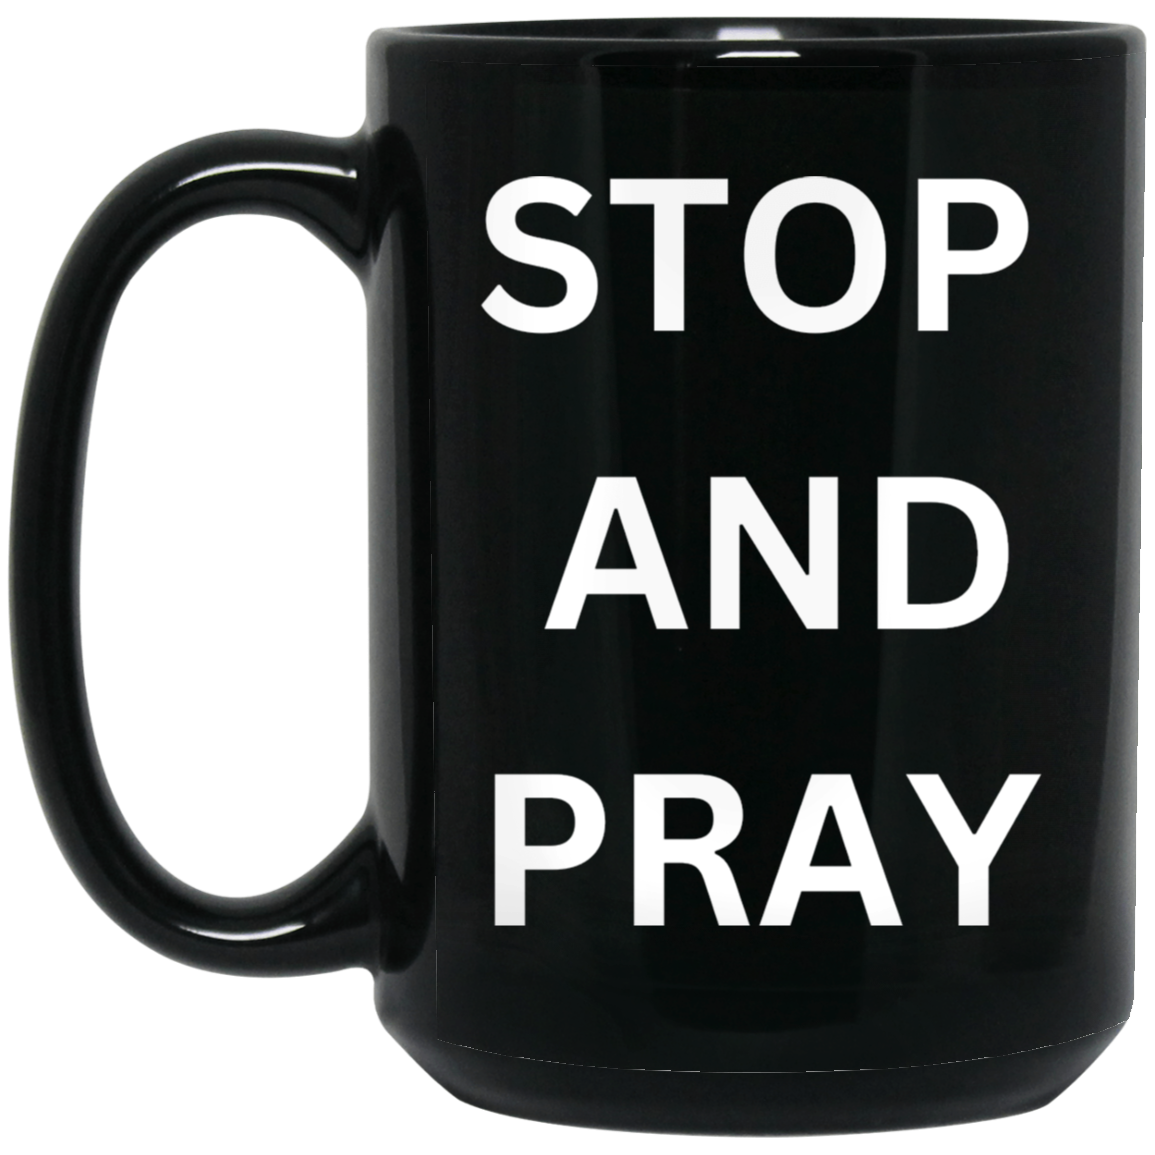 STOP AND PRAY